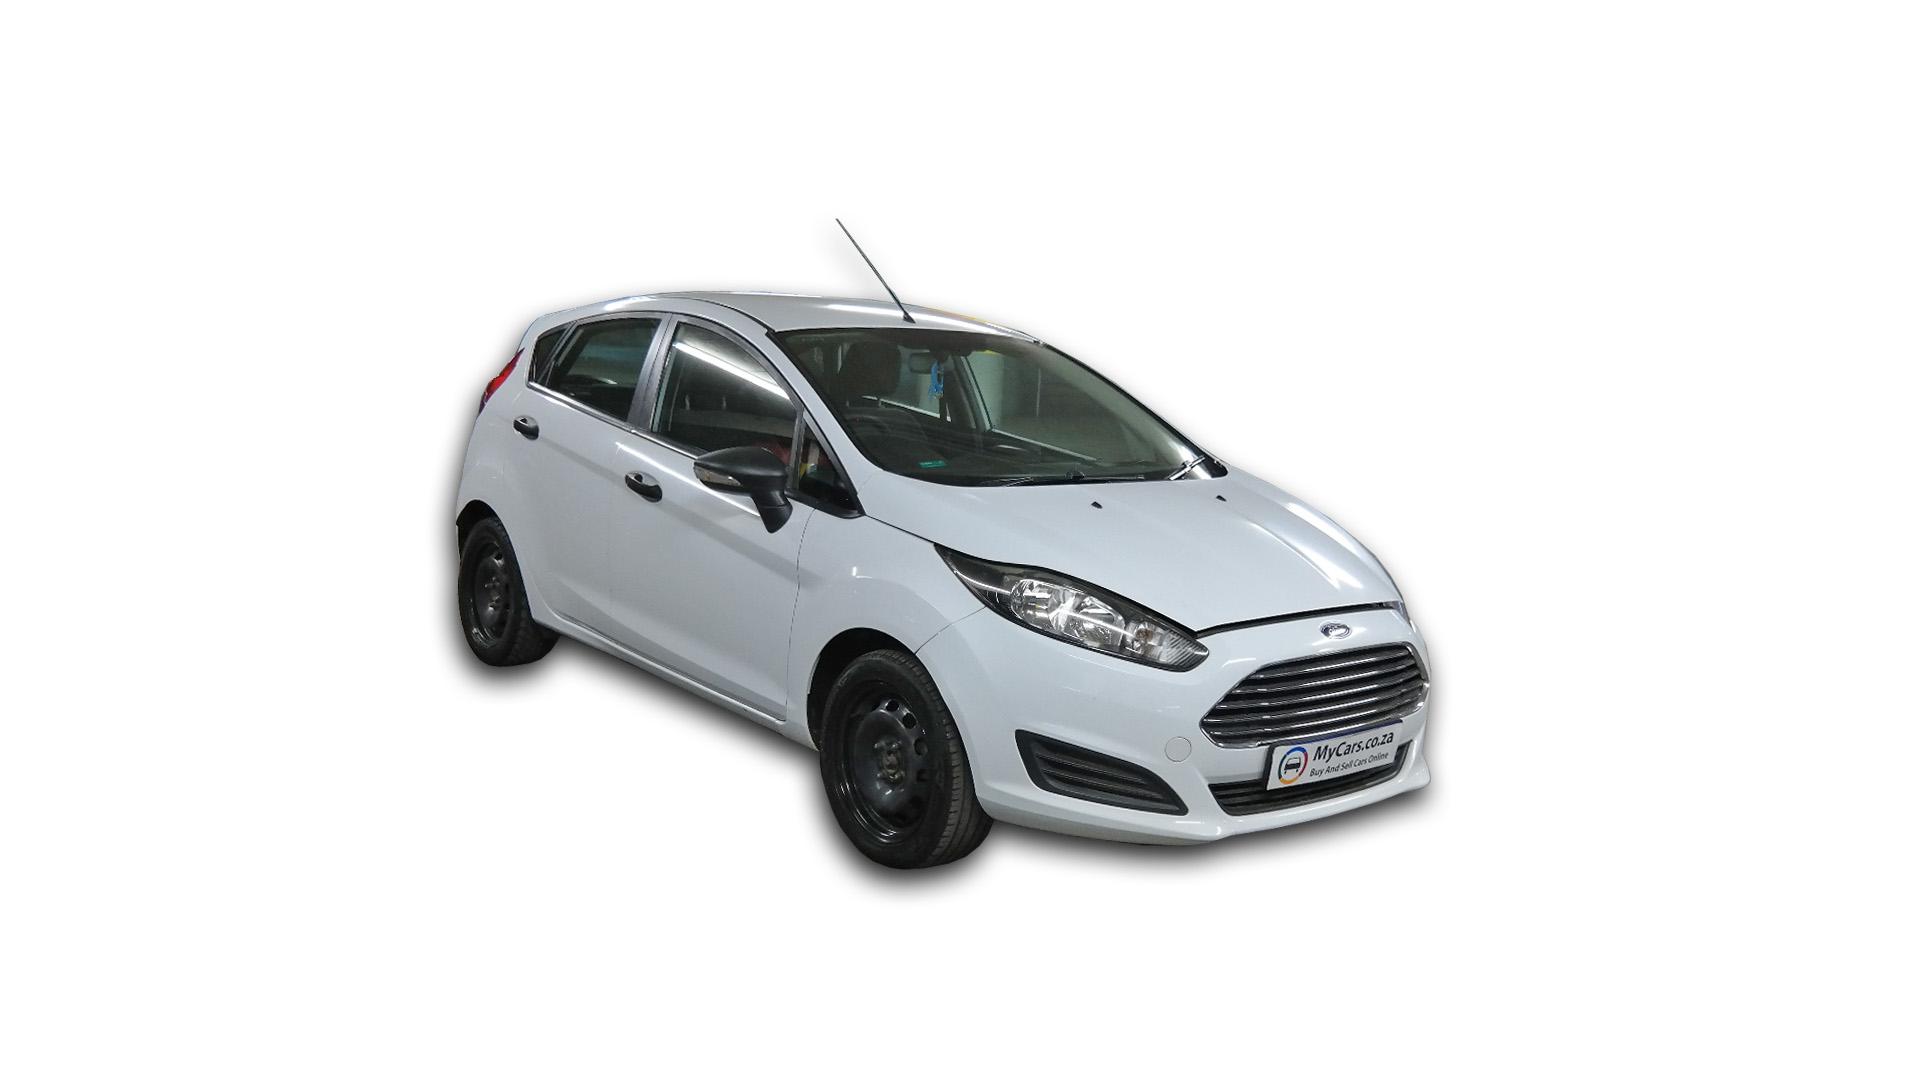 Ford Fiesta 1.0 Ecoboost Ambiente 5DR